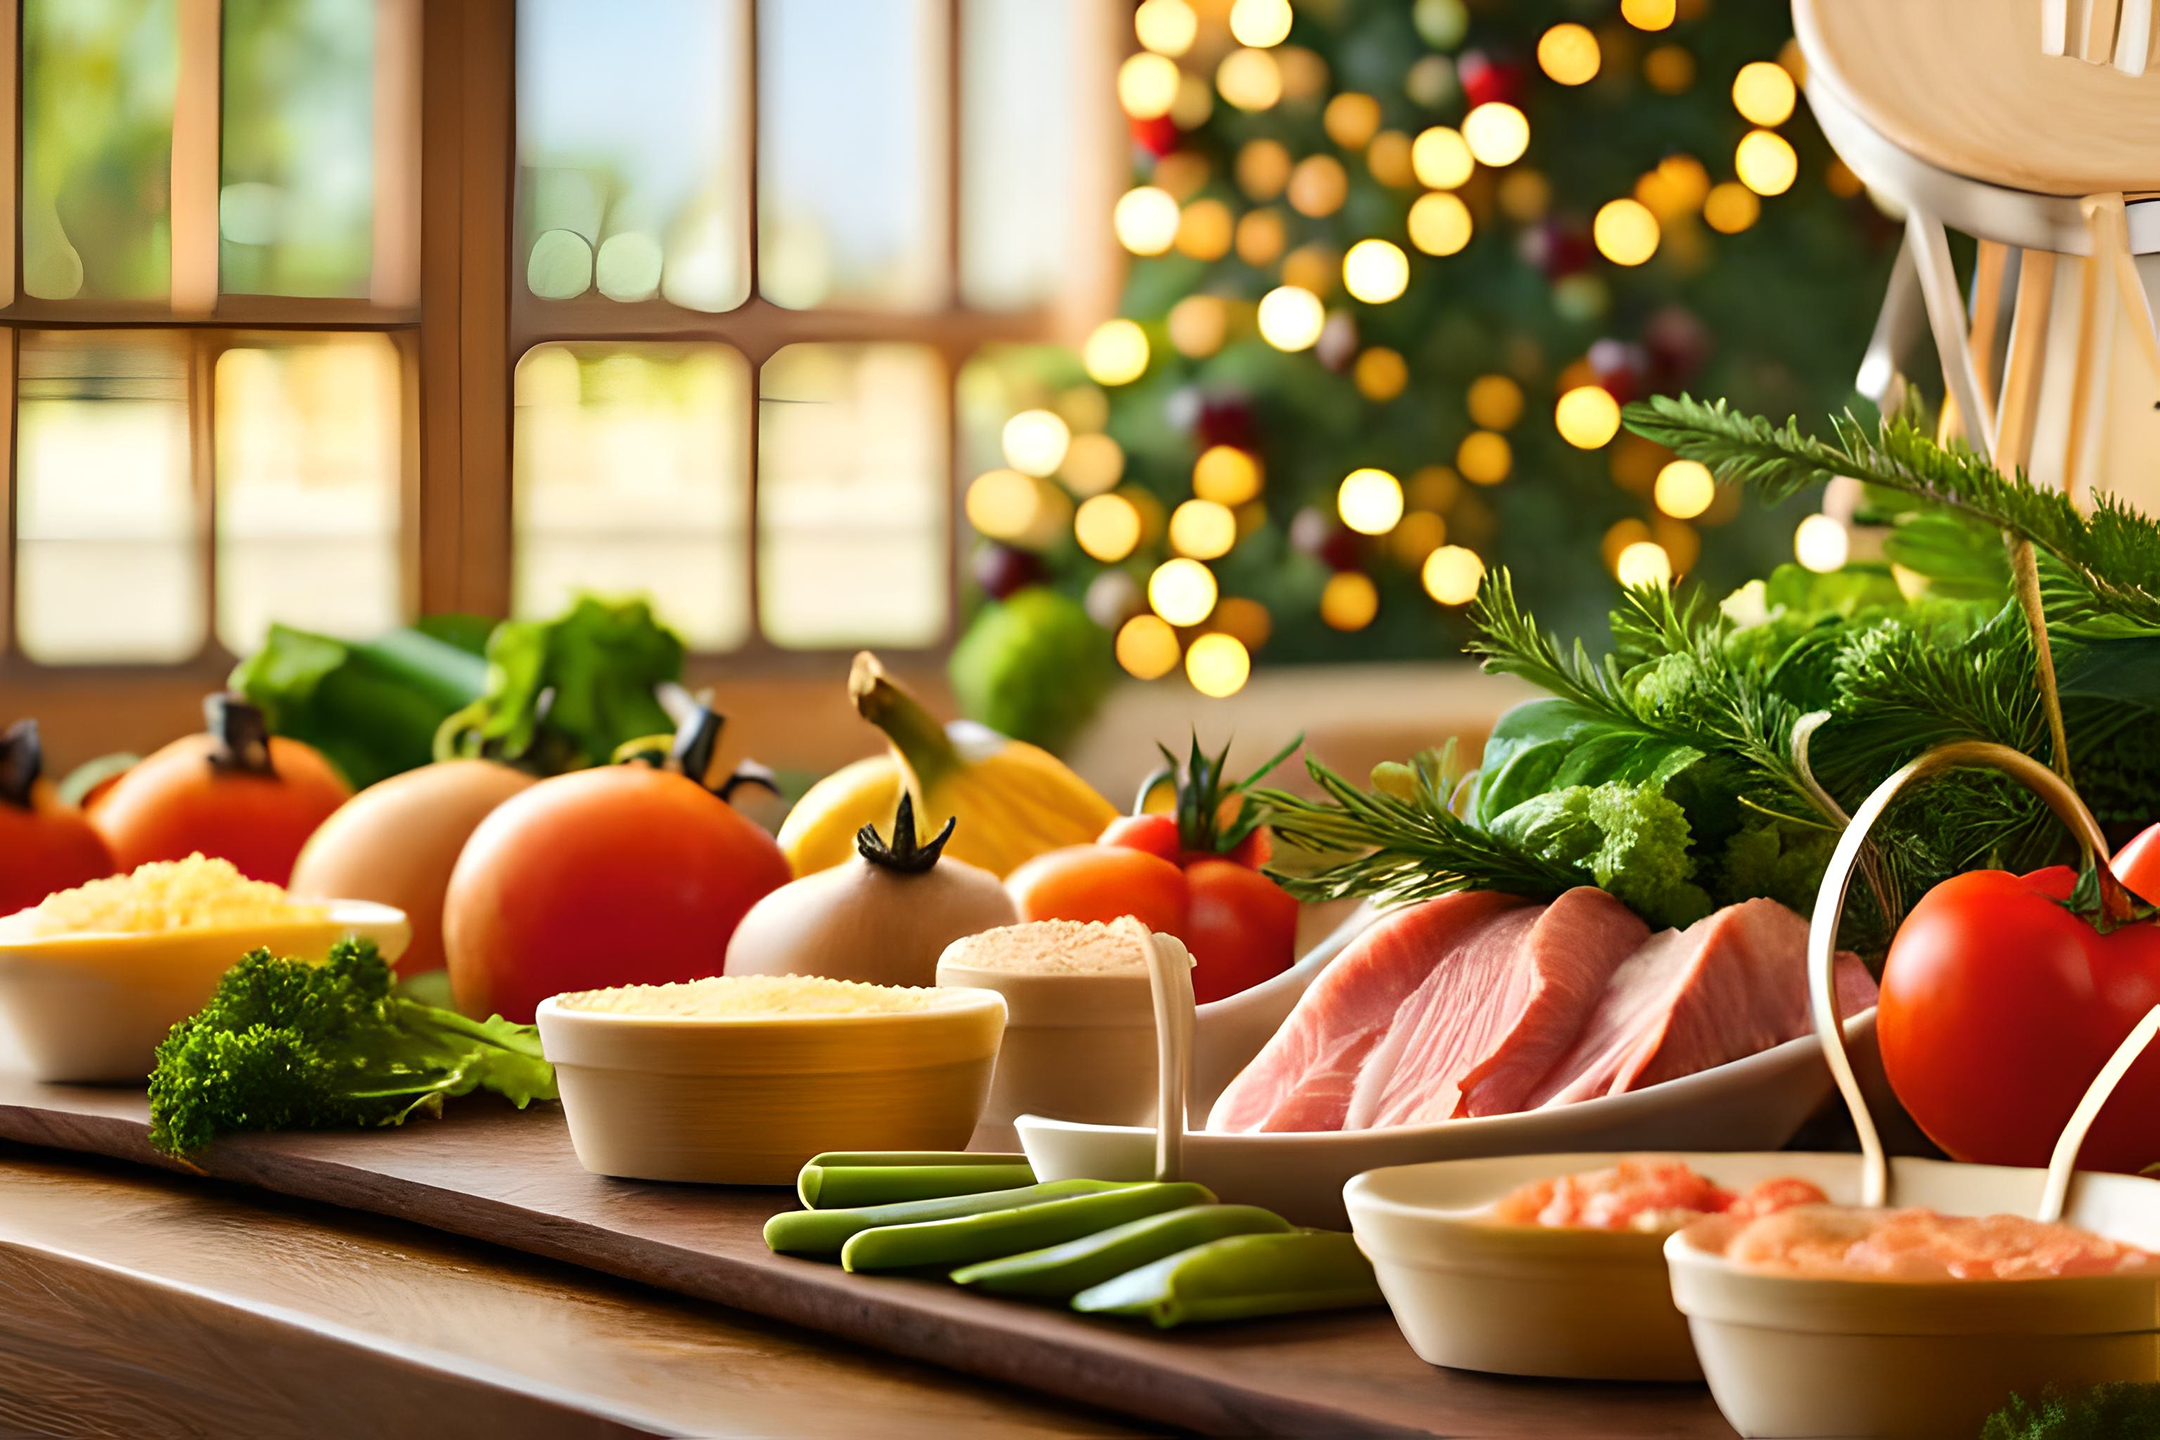 Healthy food choices during the holiday season